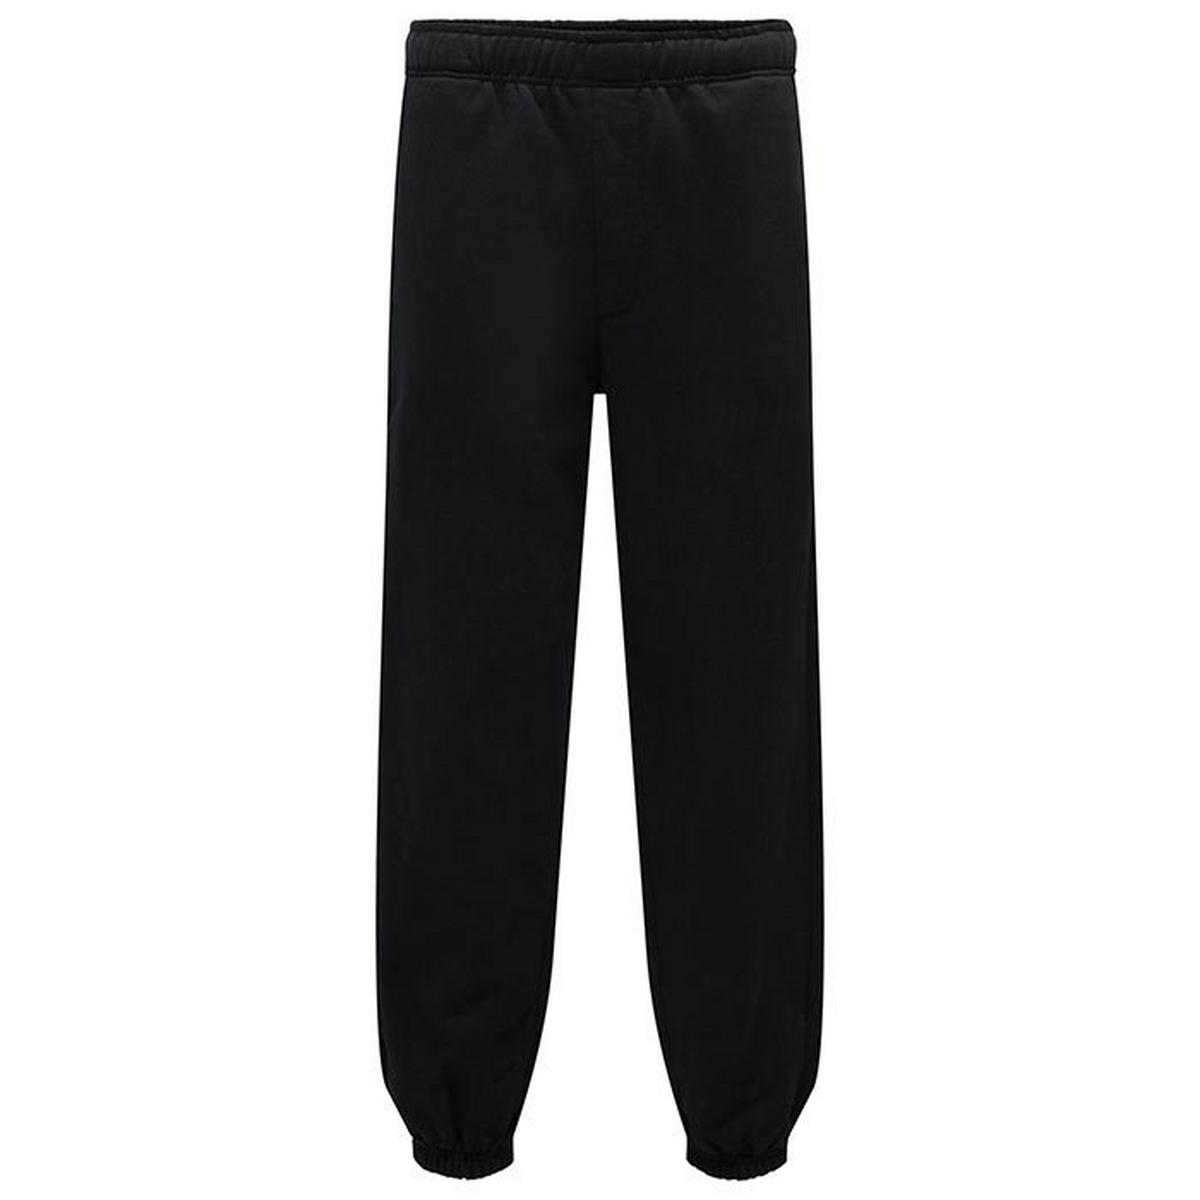 Men's Relaxed Fit Jogger Pant